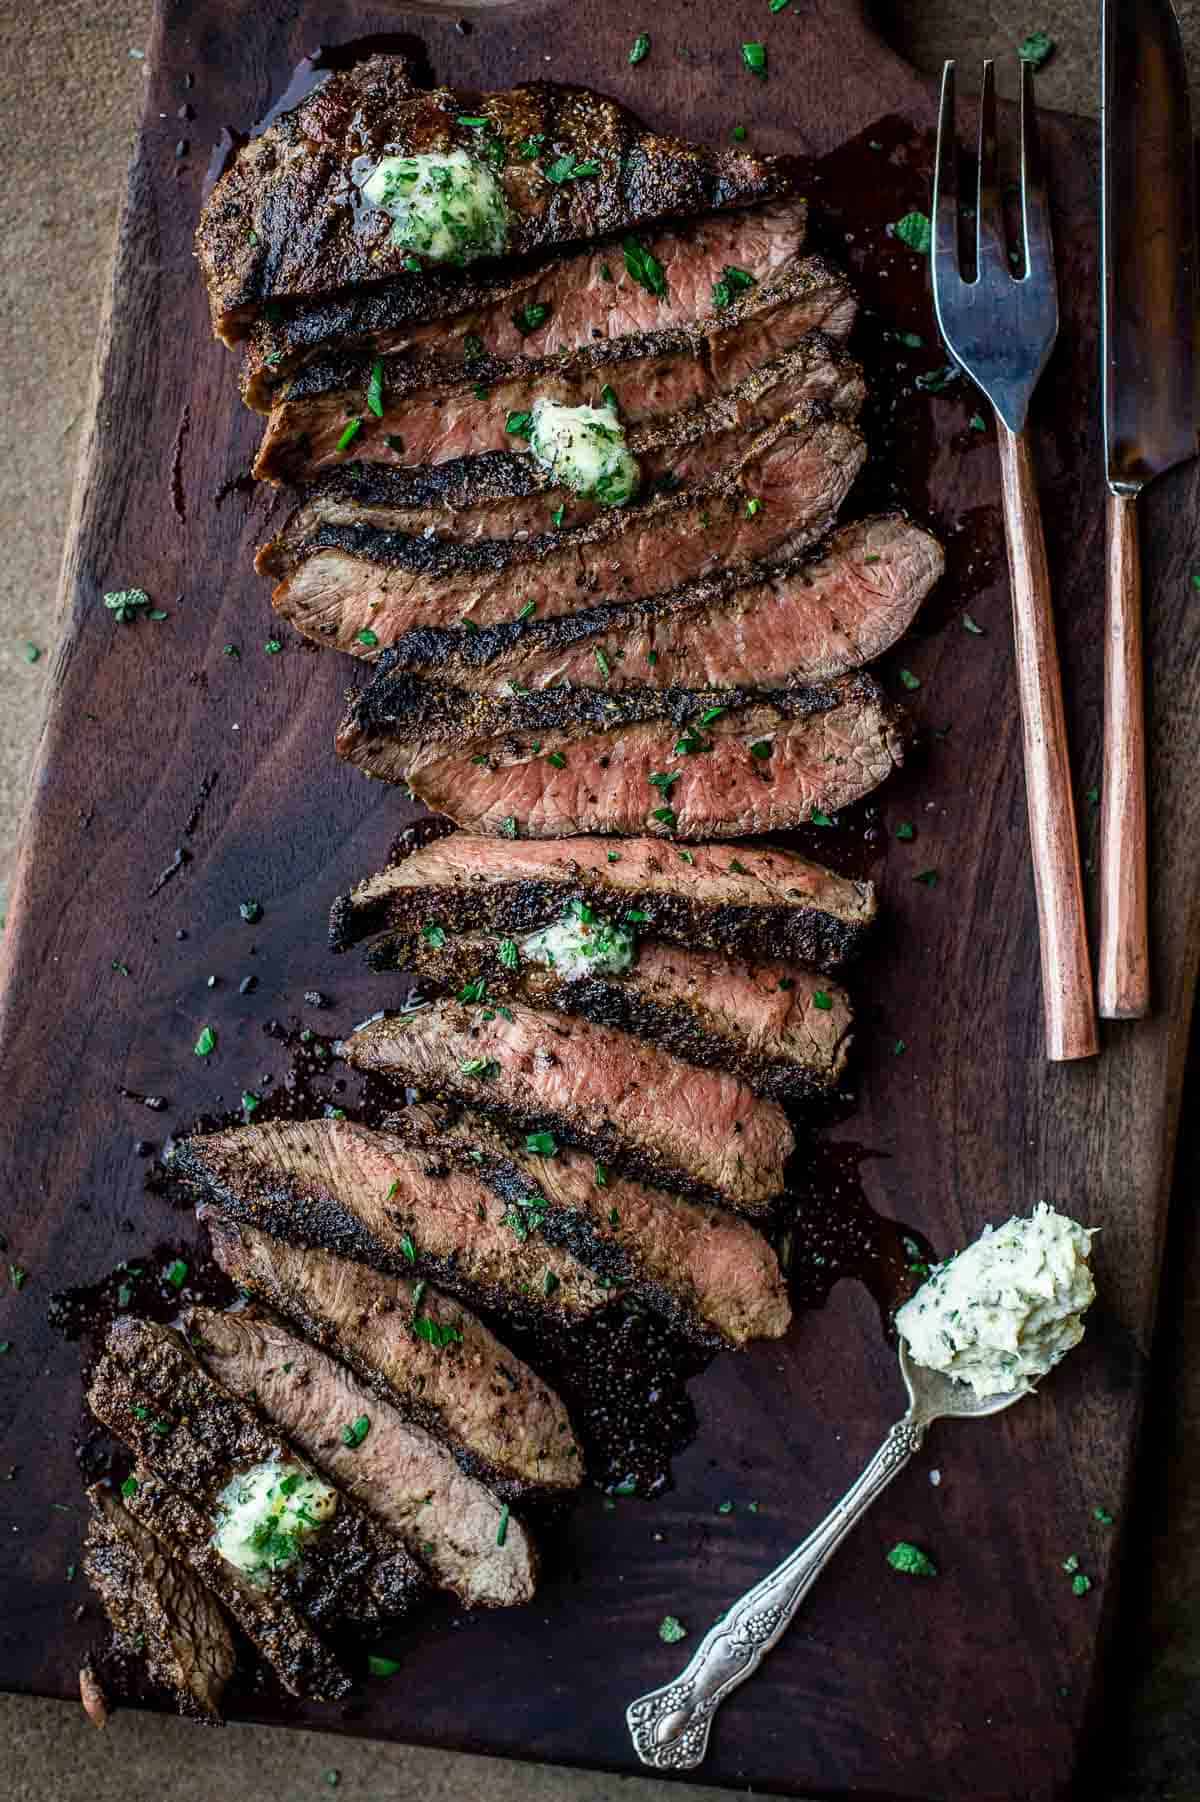 Slices of grilled beef topped with an herbed butter